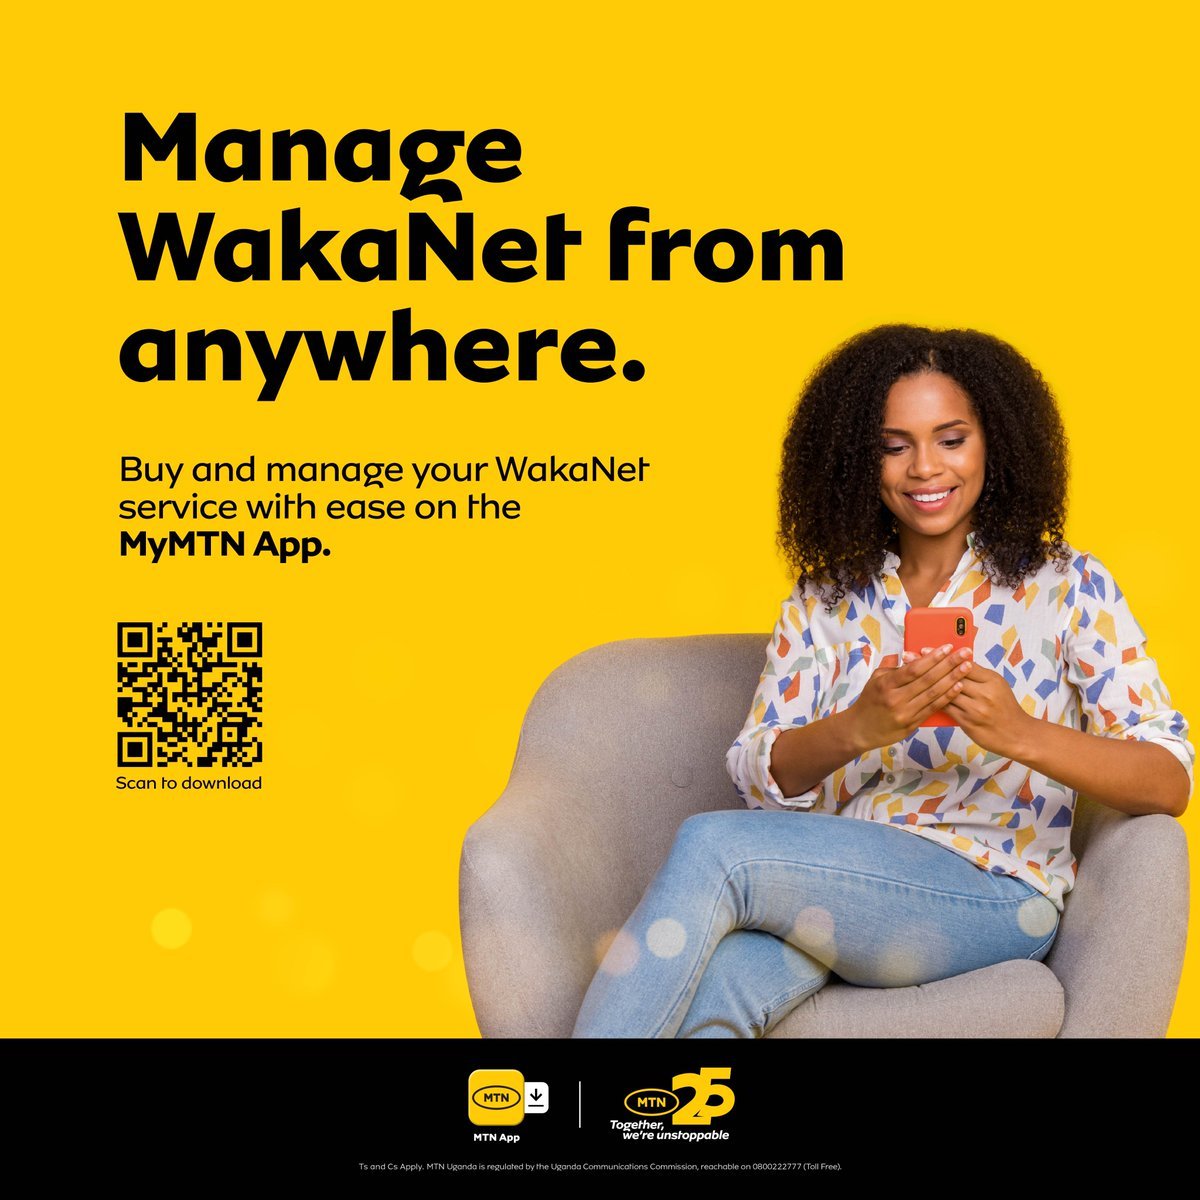 No stress! No hustle! Manage your #MTNWakaNet from anywhere - Simply download the #MyMTN app today to get started.